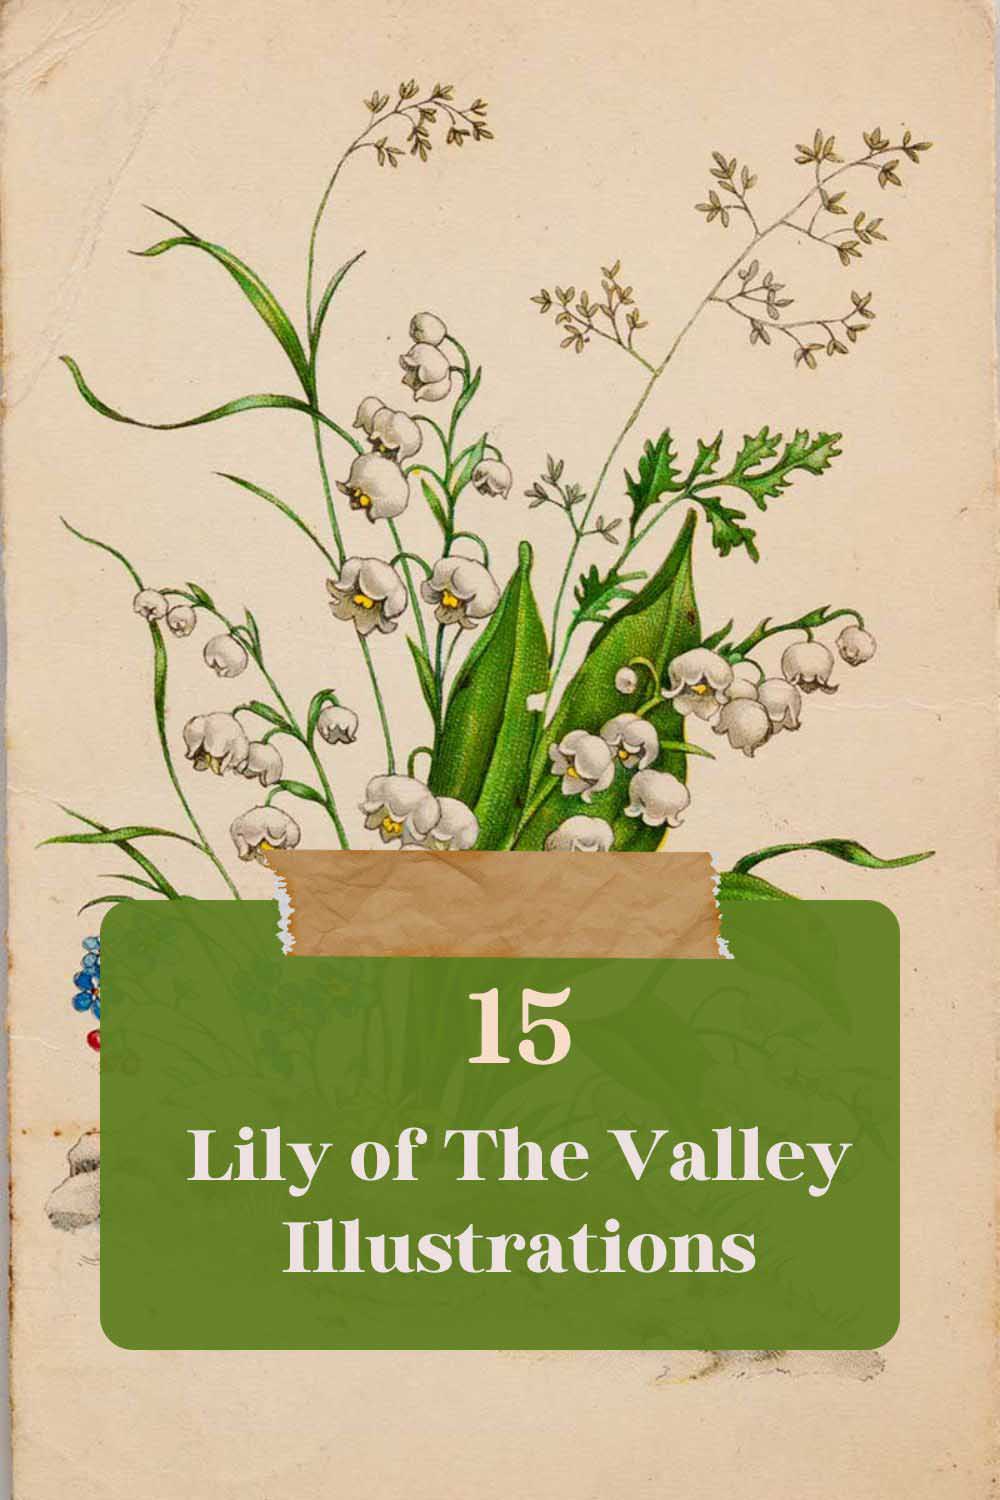 Lily of the valley drawings and prints